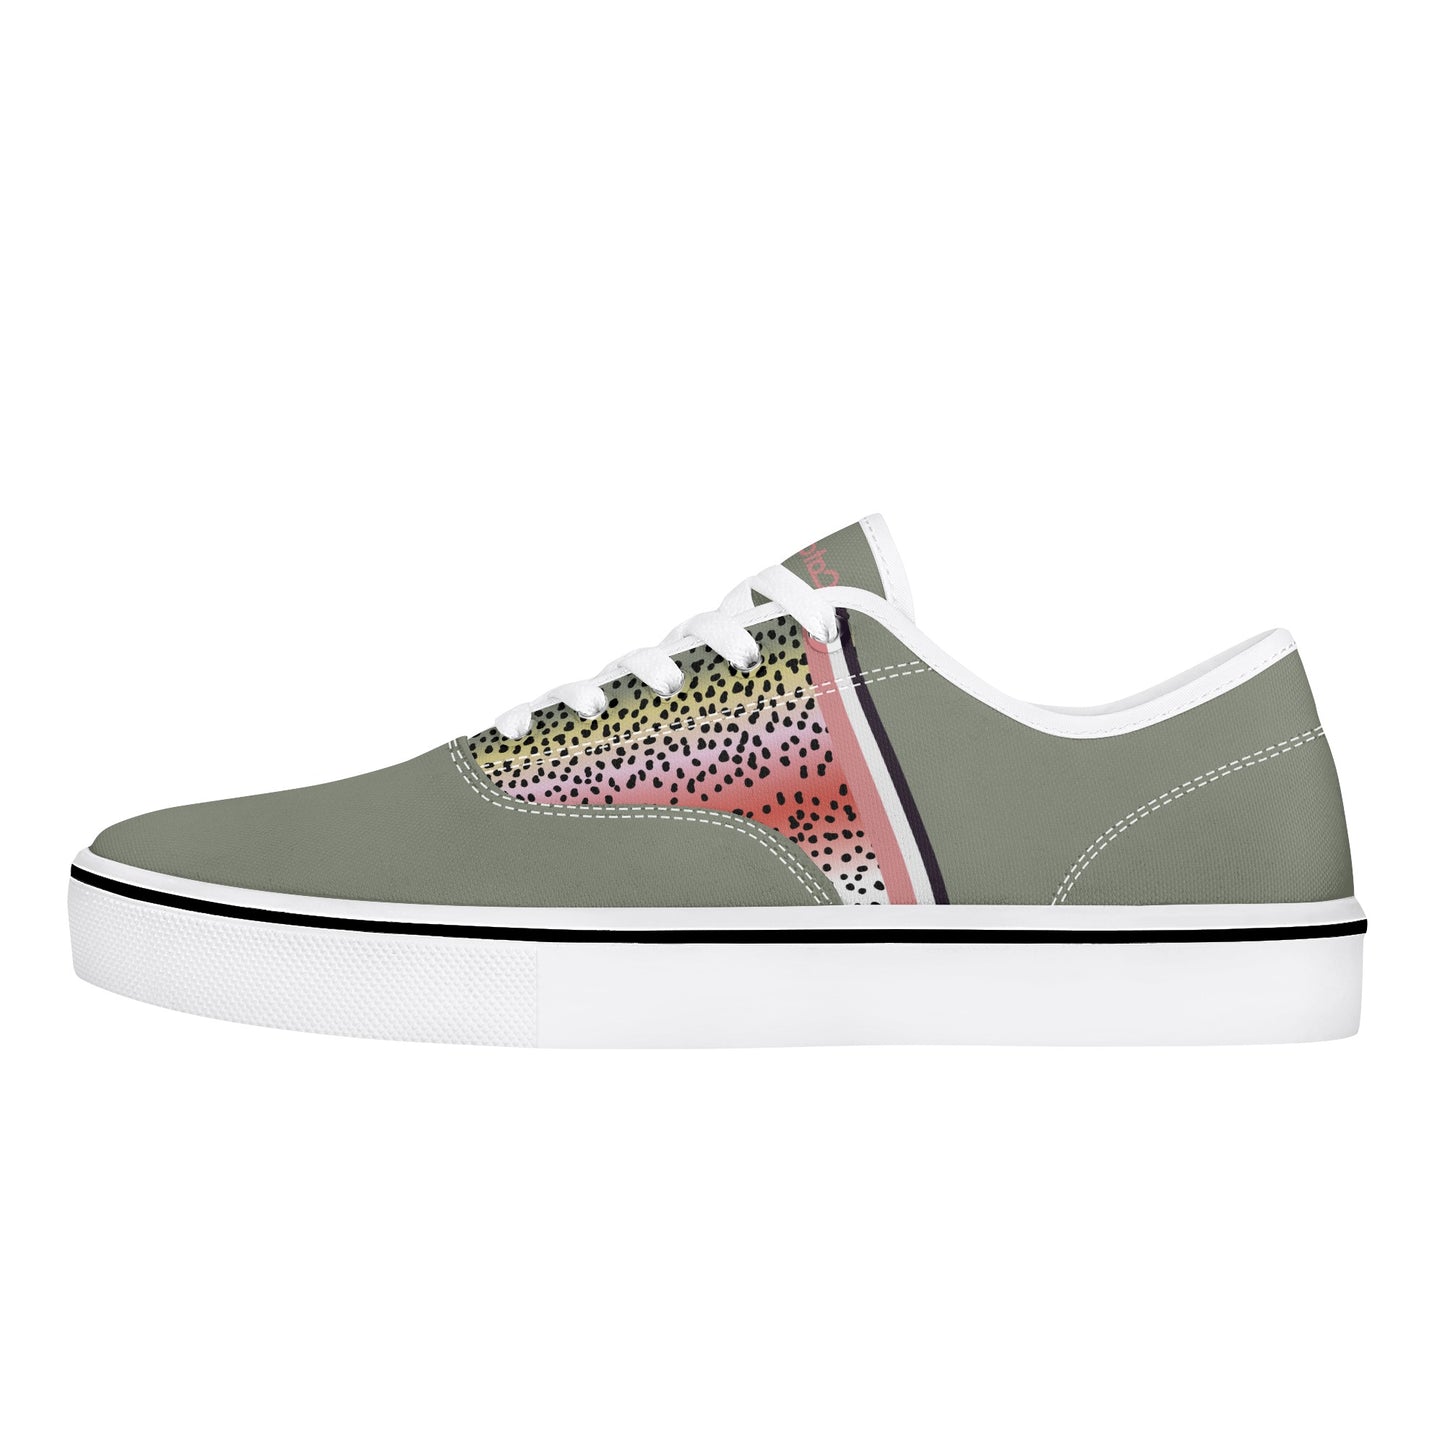 Womens Bowtown Racer Canvas Boat Shoe